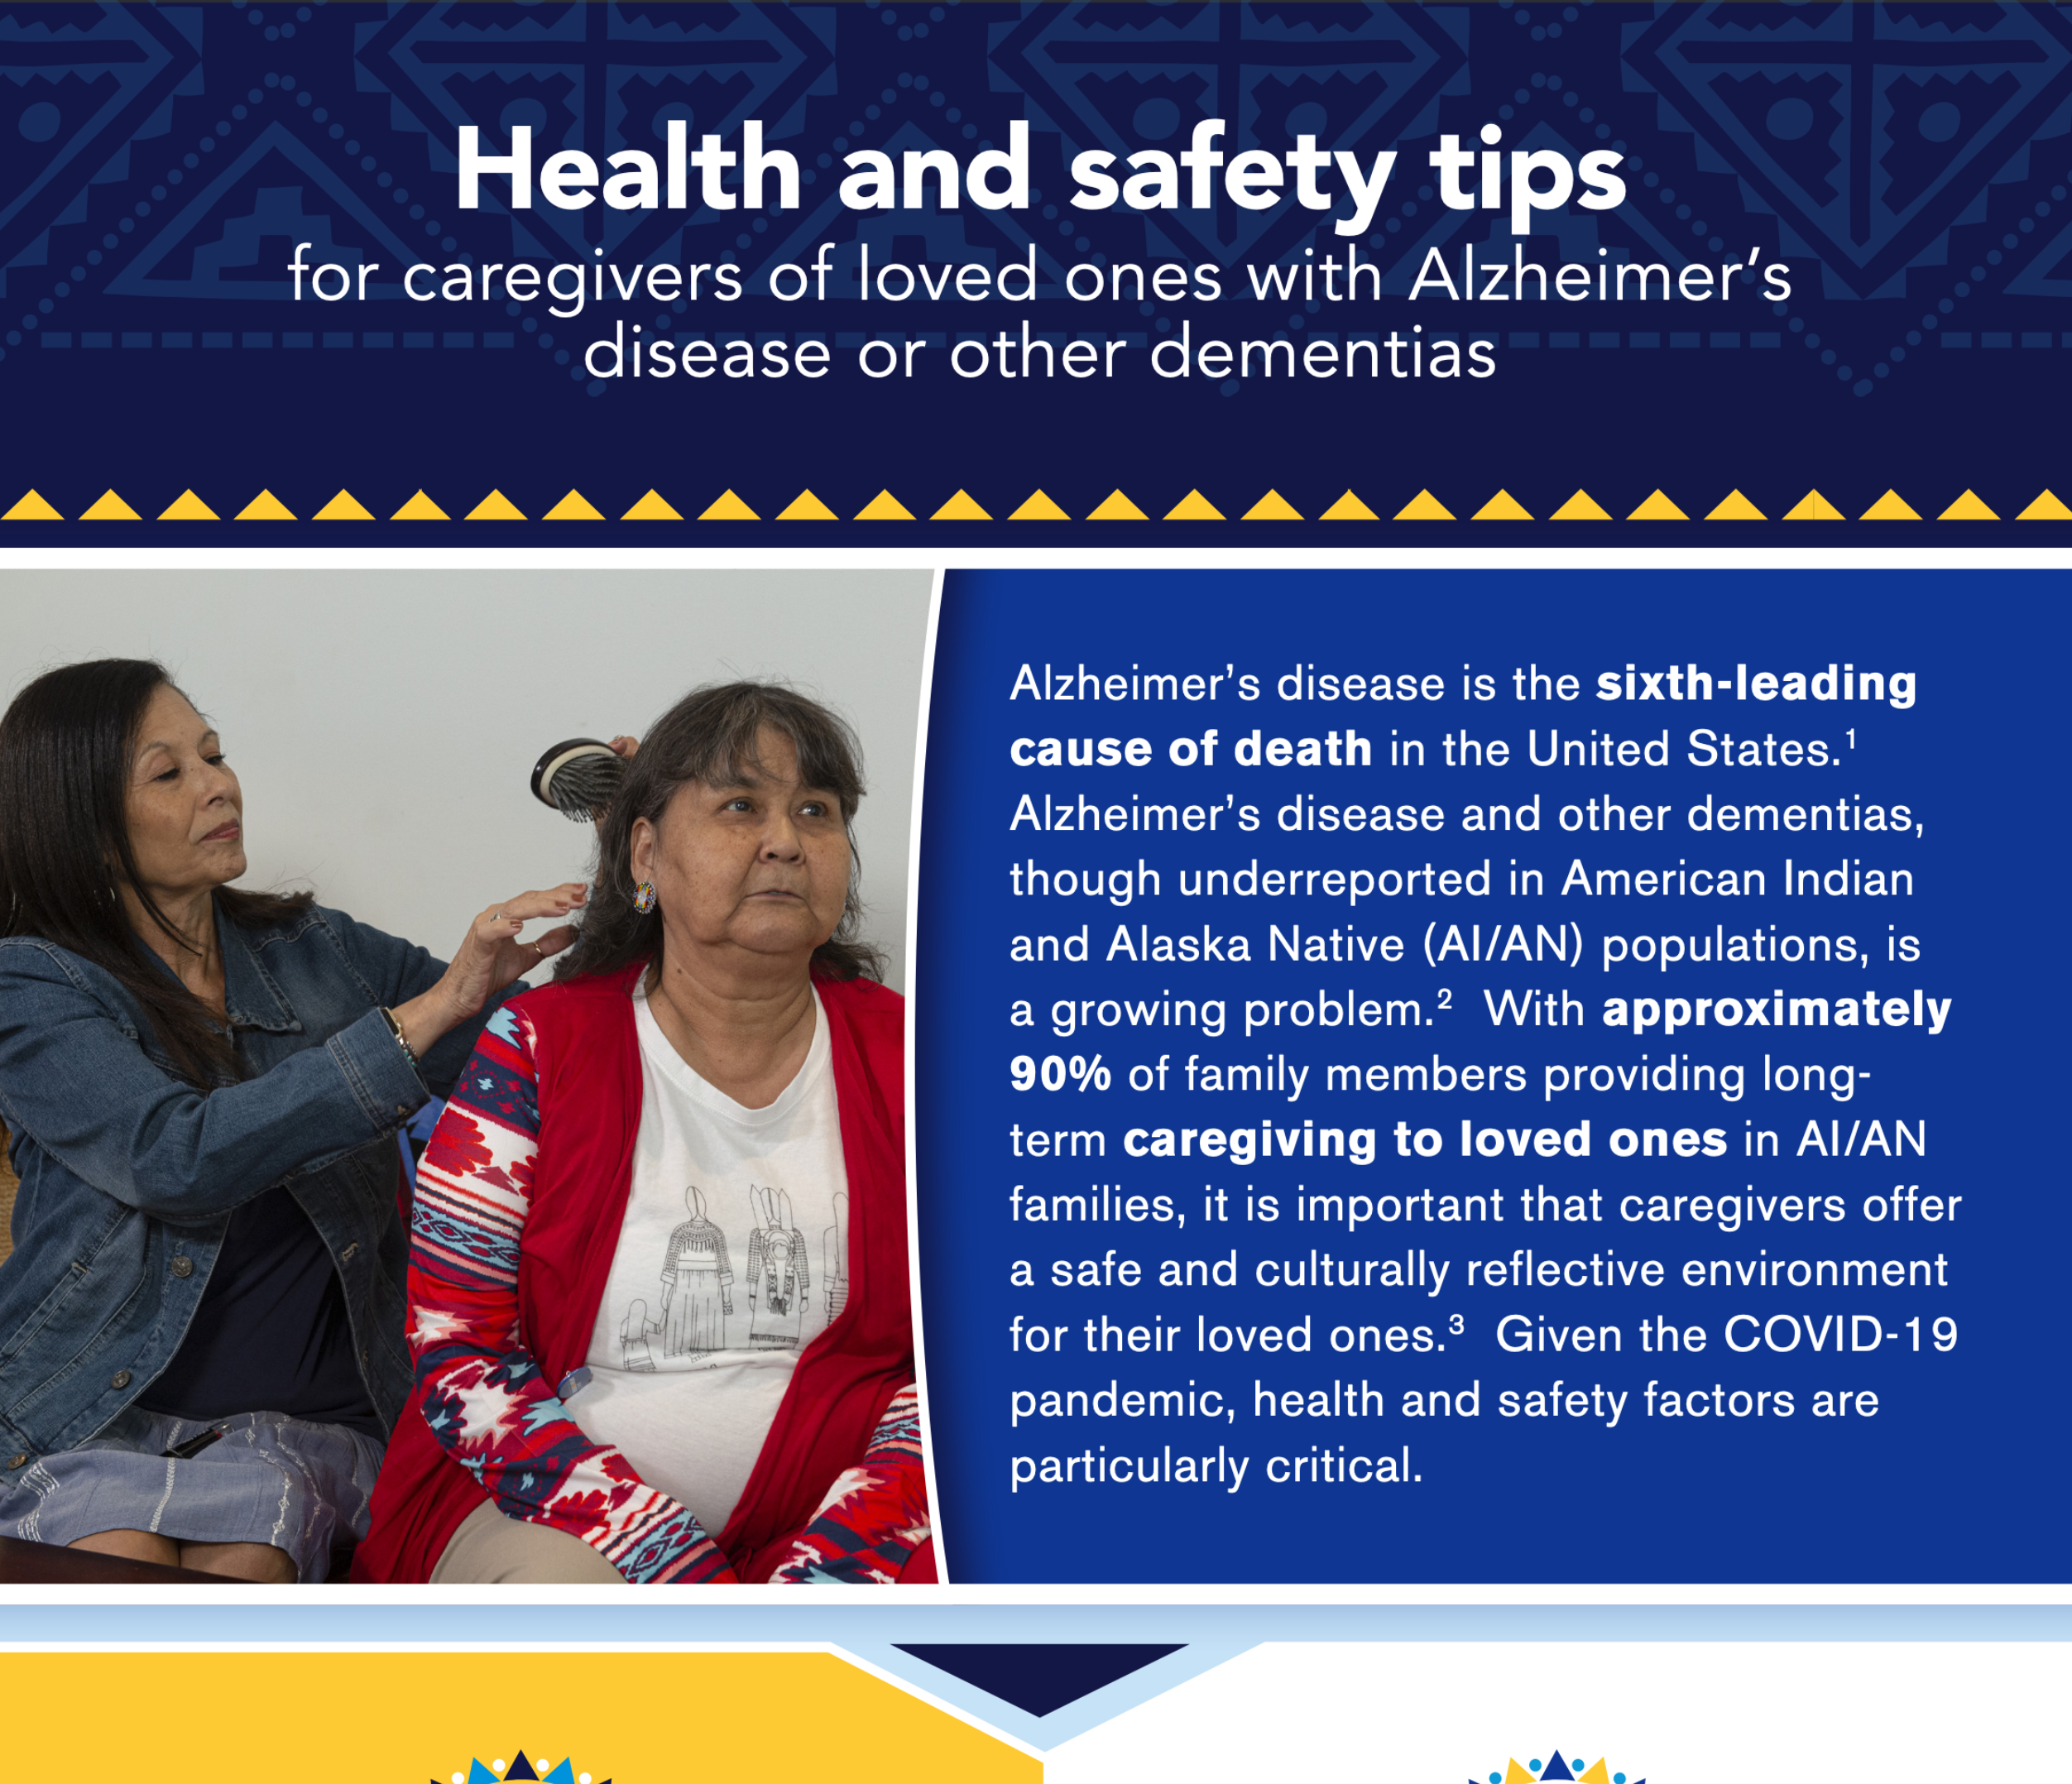 Health and safety tips for caregivers of loved one with Alzheimer's disease or other dementias